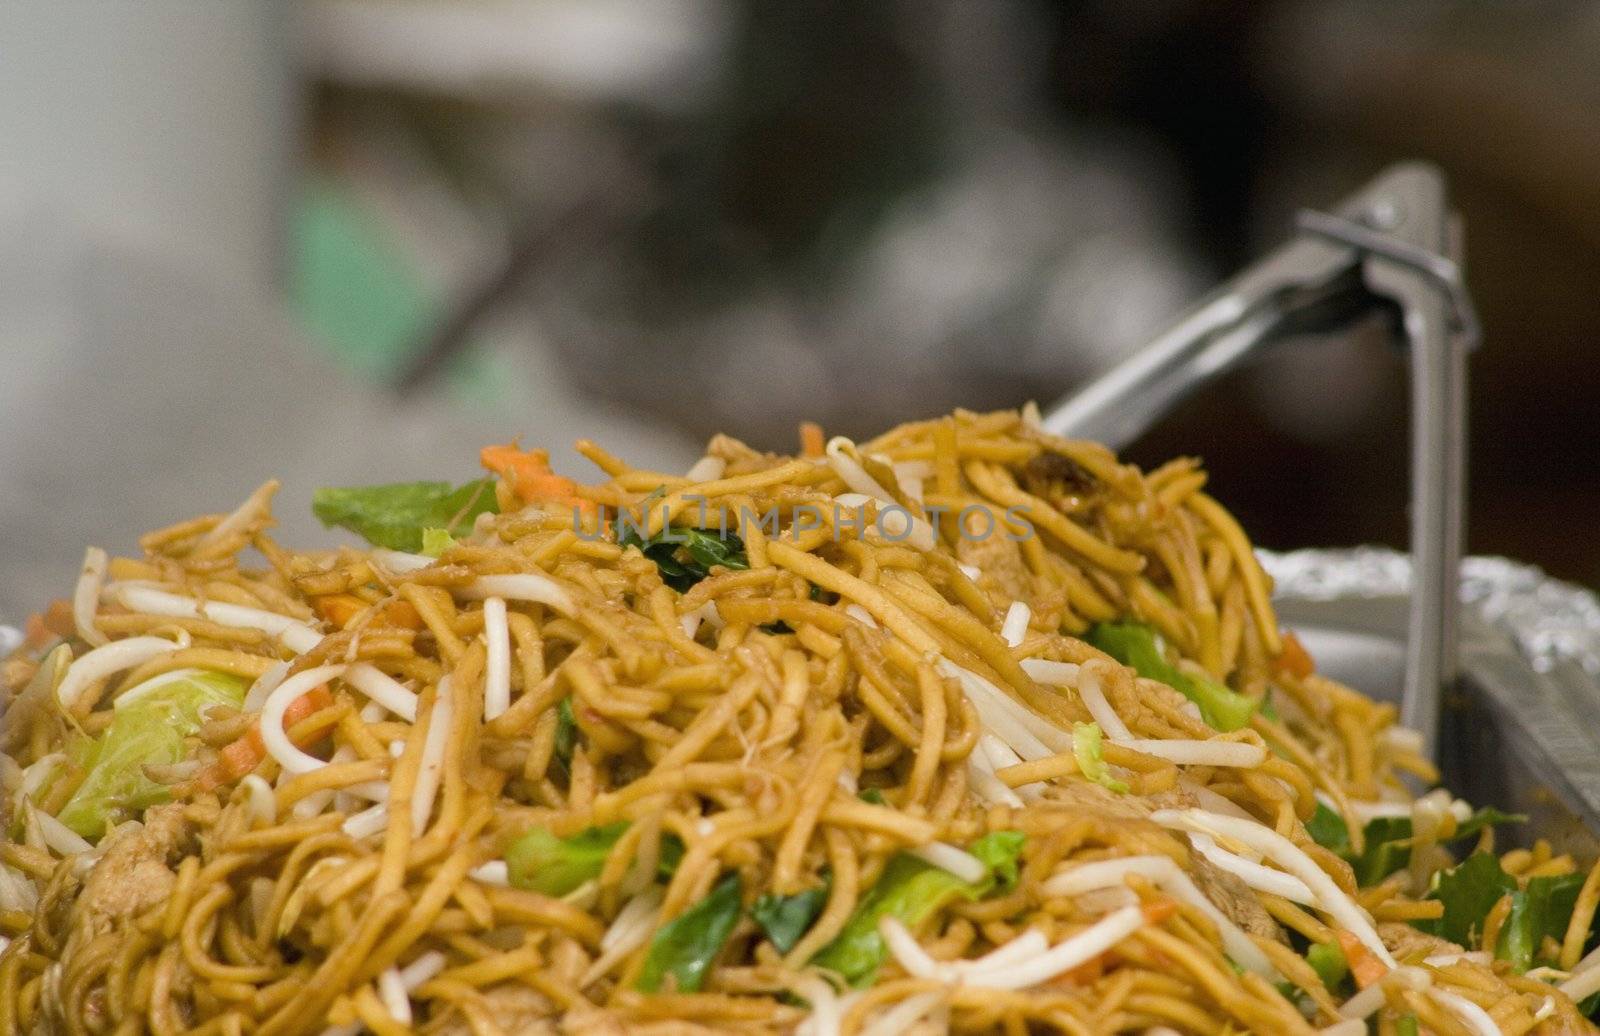 stir-fry vegetables with noodles with a pair of tongs in the background